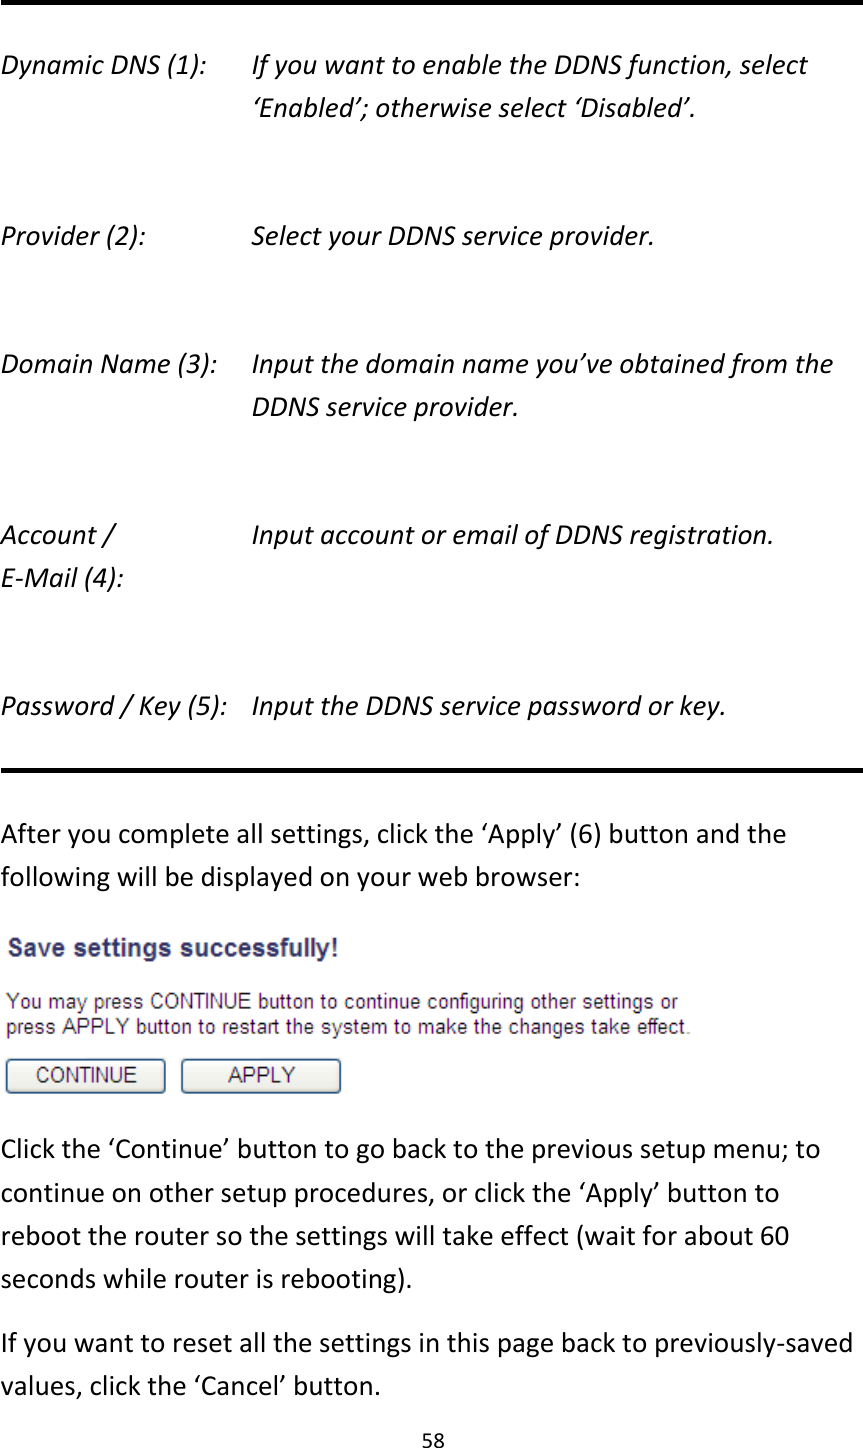 58  Dynamic DNS (1):    If you want to enable the DDNS function, select ‘Enabled’; otherwise select ‘Disabled’.  Provider (2):      Select your DDNS service provider.  Domain Name (3):    Input the domain name you’ve obtained from the DDNS service provider.  Account /        Input account or email of DDNS registration. E-Mail (4):    Password / Key (5):   Input the DDNS service password or key.  After you complete all settings, click the ‘Apply’ (6) button and the following will be displayed on your web browser:  Click the ‘Continue’ button to go back to the previous setup menu; to continue on other setup procedures, or click the ‘Apply’ button to reboot the router so the settings will take effect (wait for about 60 seconds while router is rebooting). If you want to reset all the settings in this page back to previously-saved values, click the ‘Cancel’ button. 